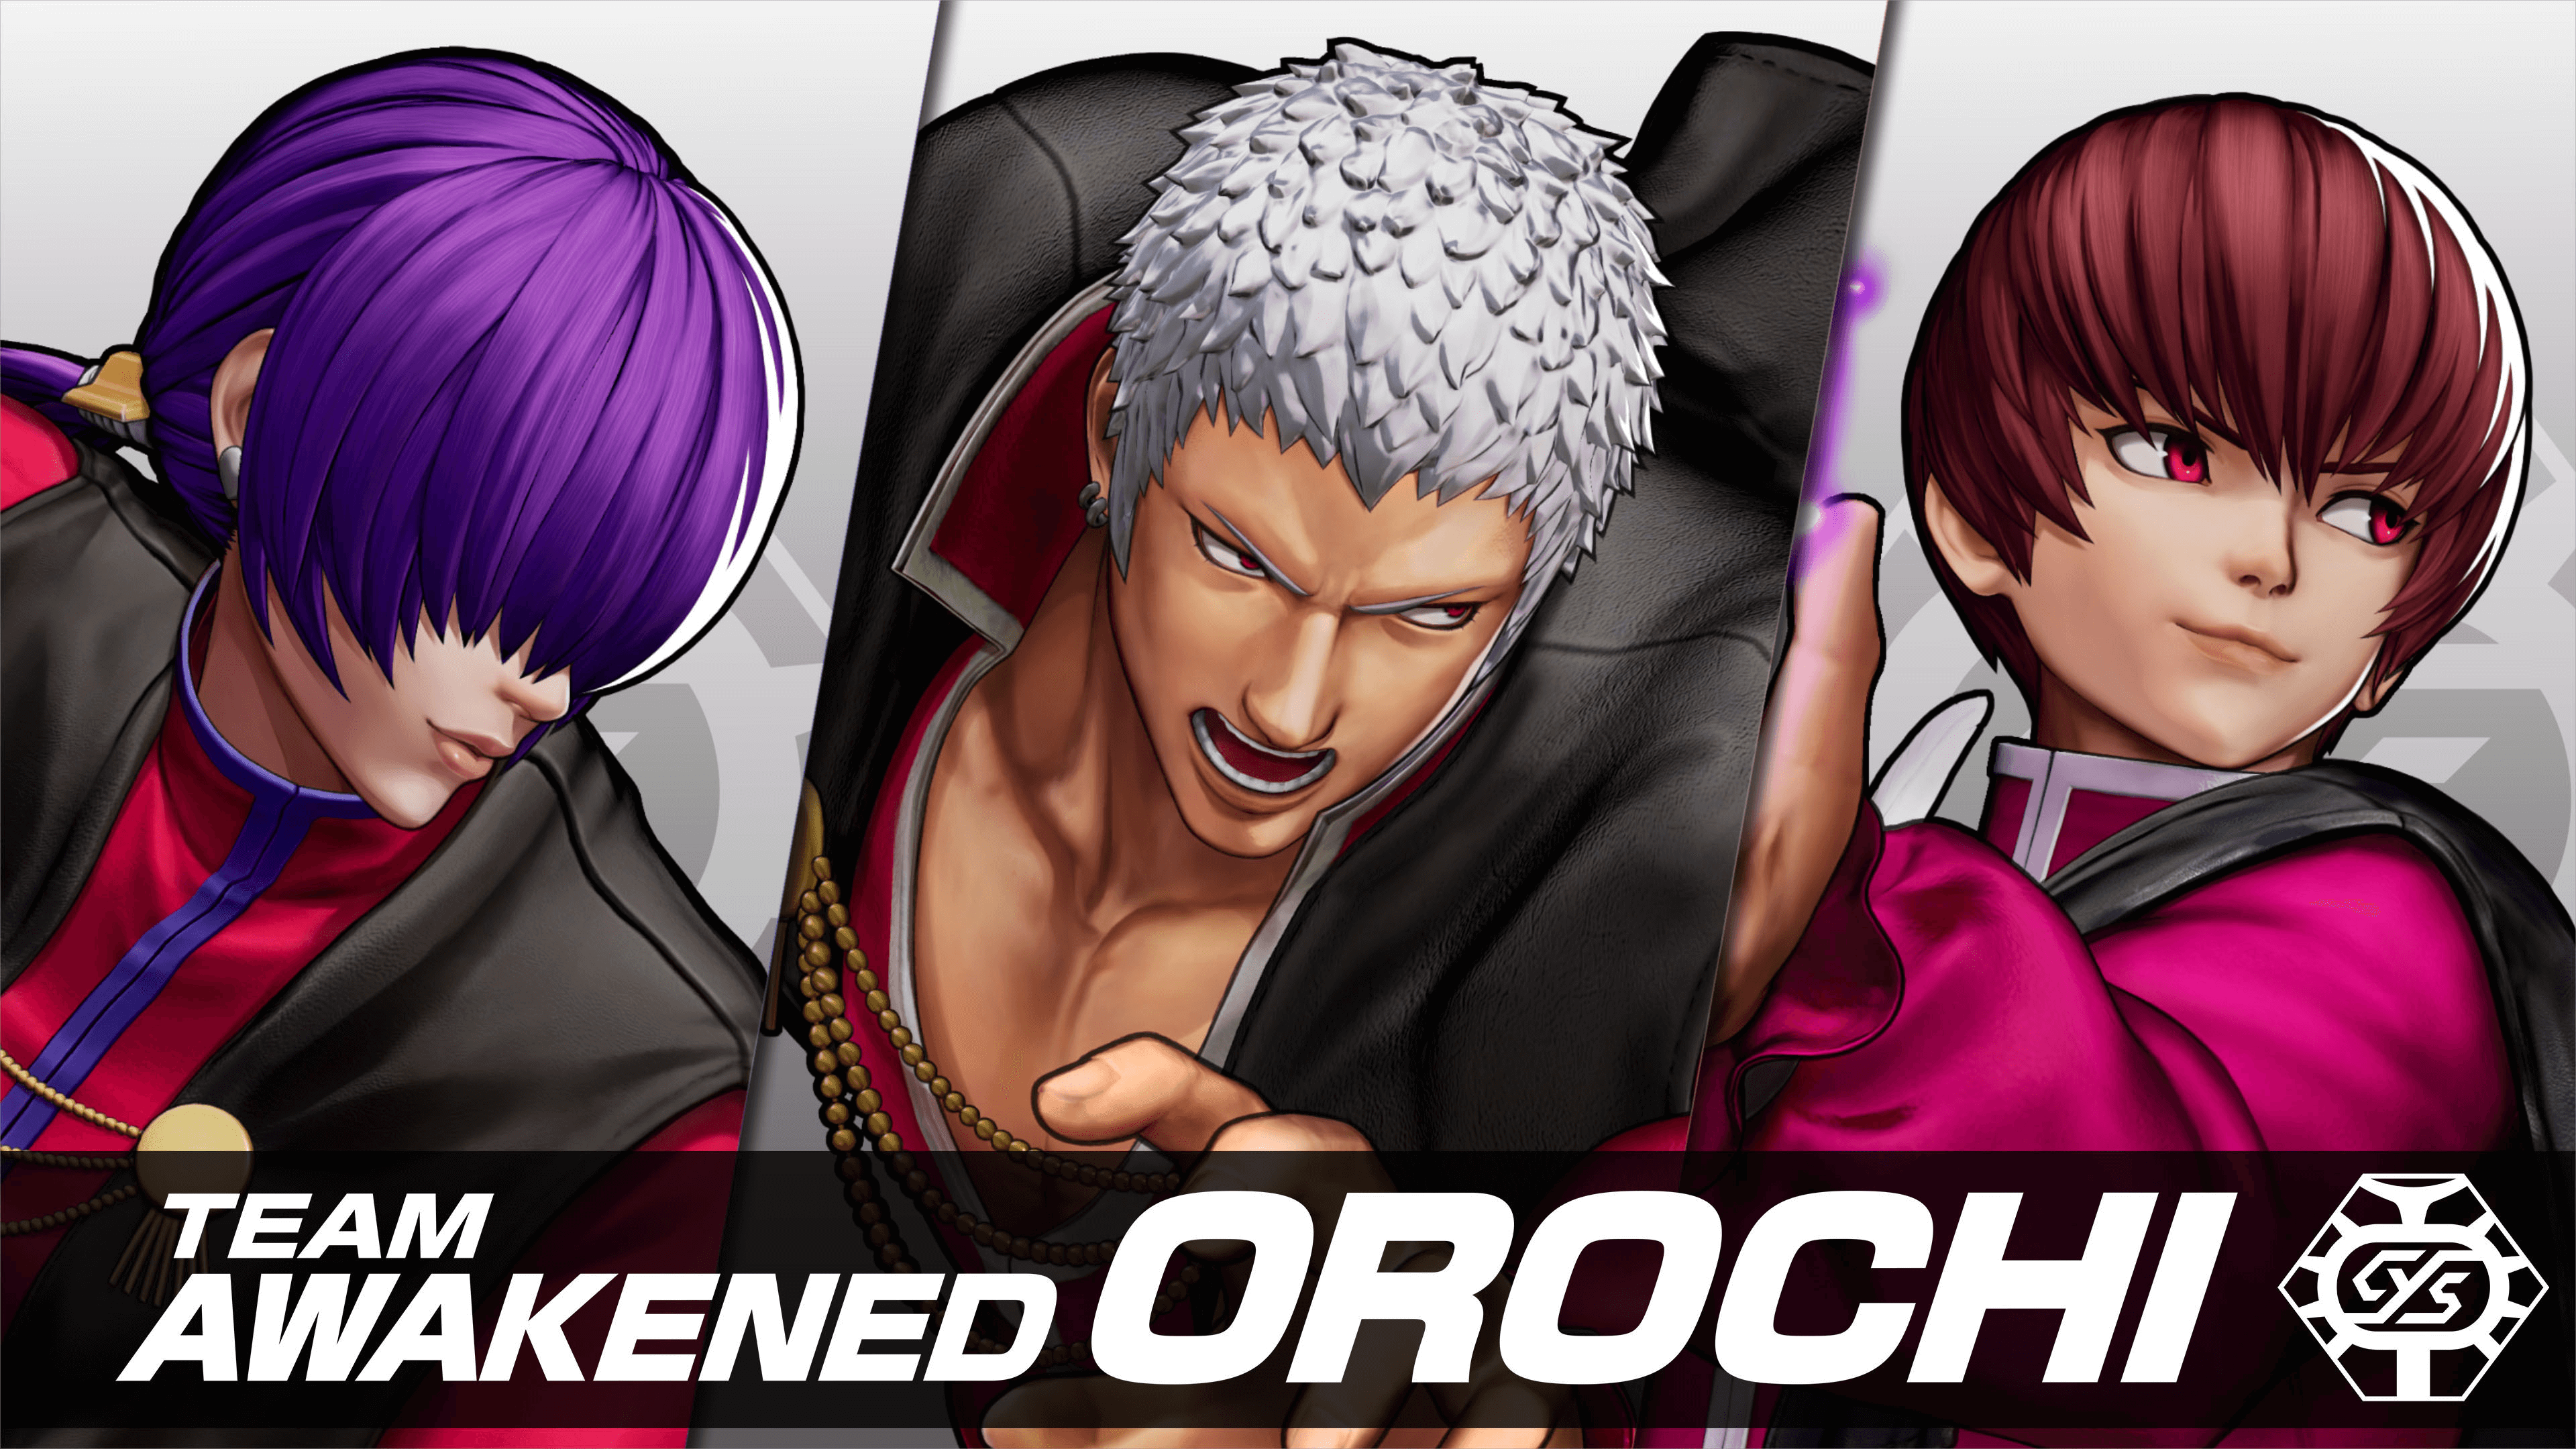 In their Awakened State, Team Orochi Joins The King of Fighters XV